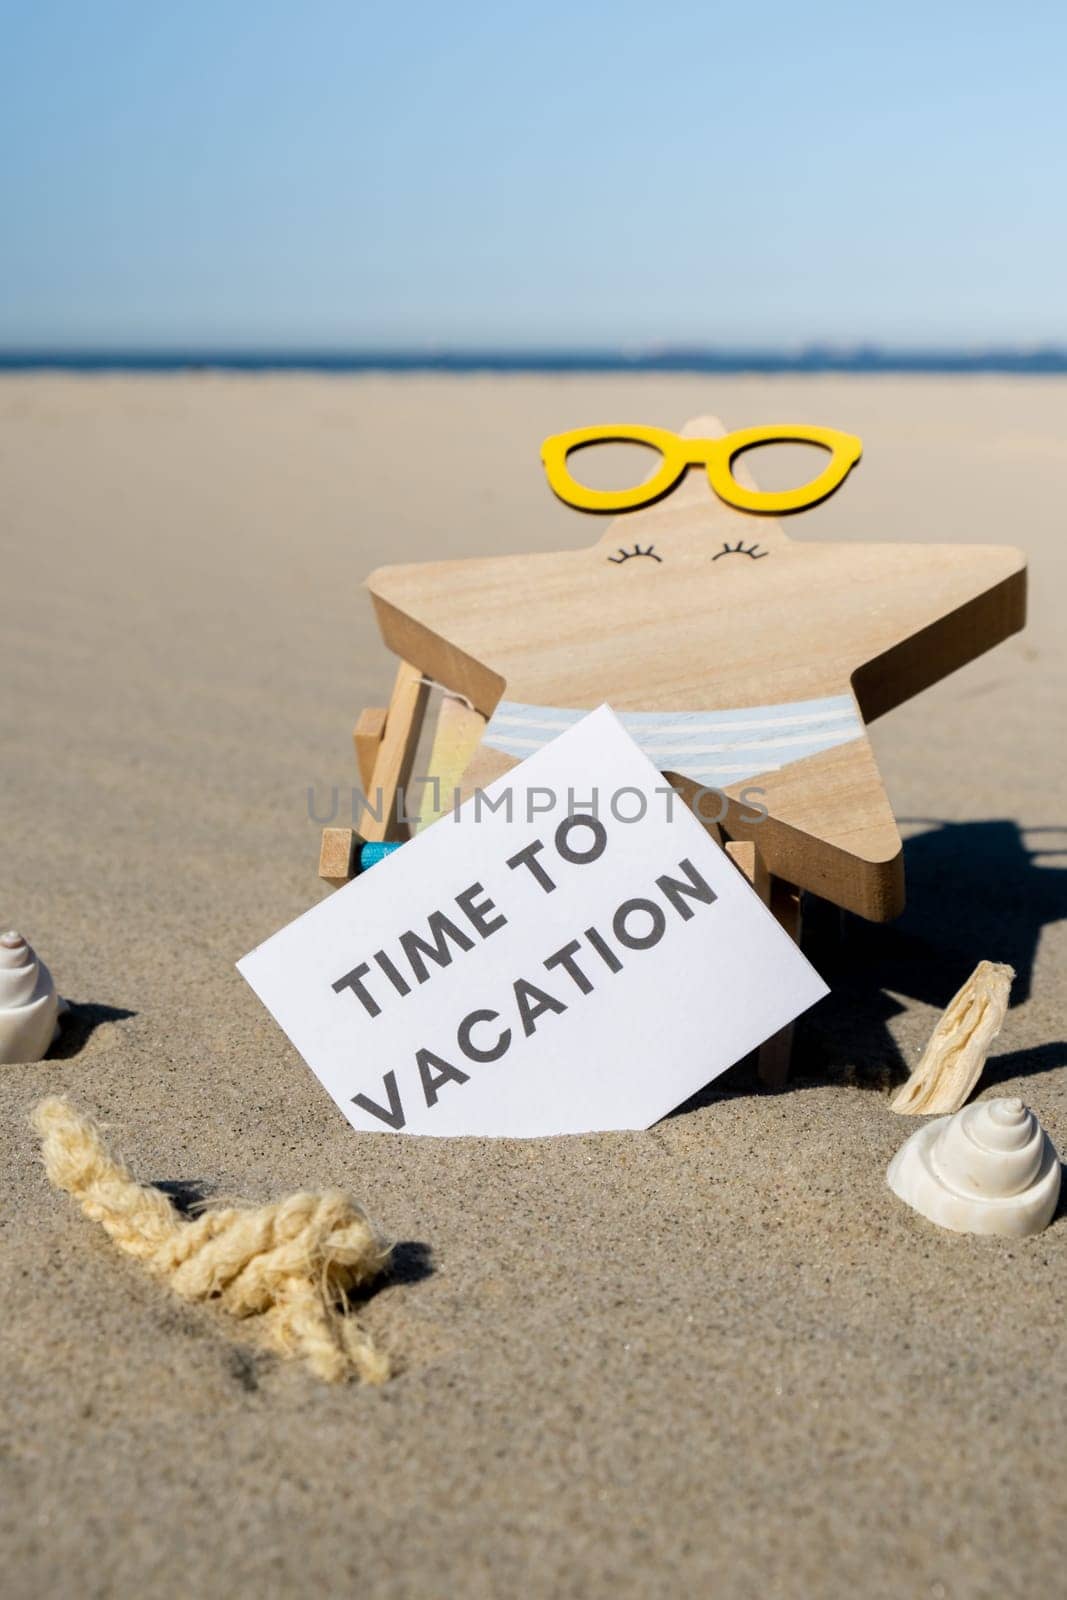 TIME TO VACATION text on paper greeting card on background of beach chair lounge starfish summer vacation decor. Sandy beach sun. Holiday concept postcard. Travel Business concept